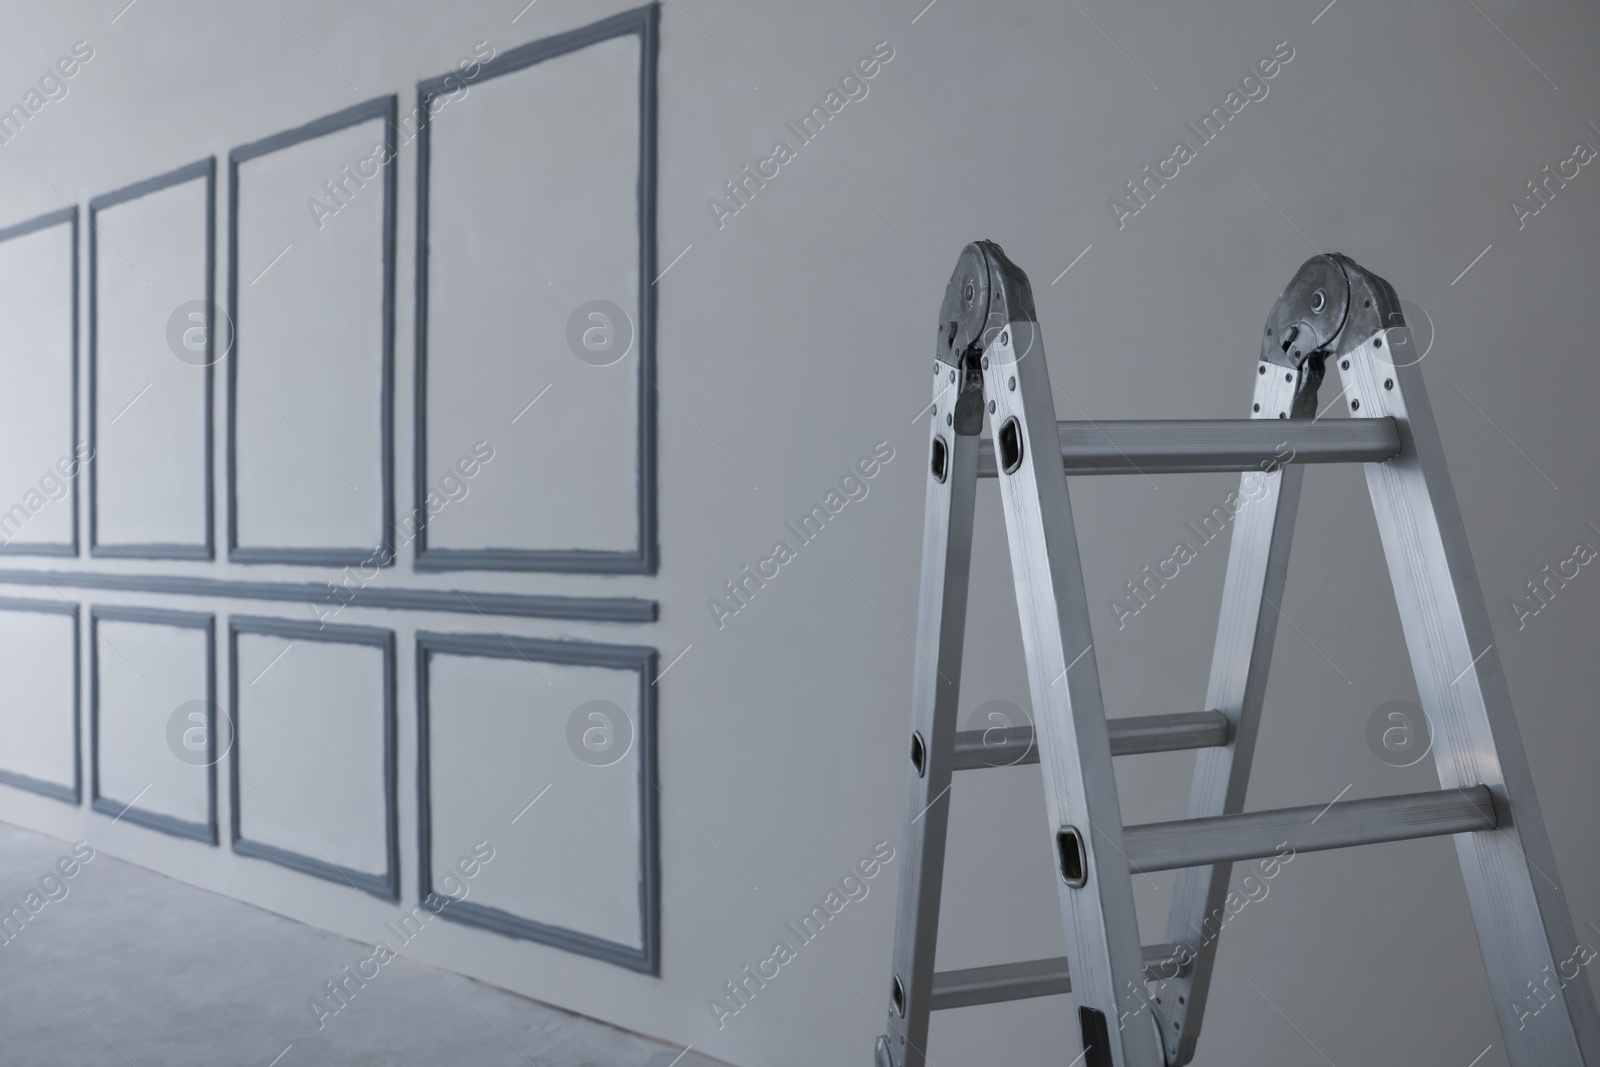 Photo of Metal ladder near fresh painted walls indoors